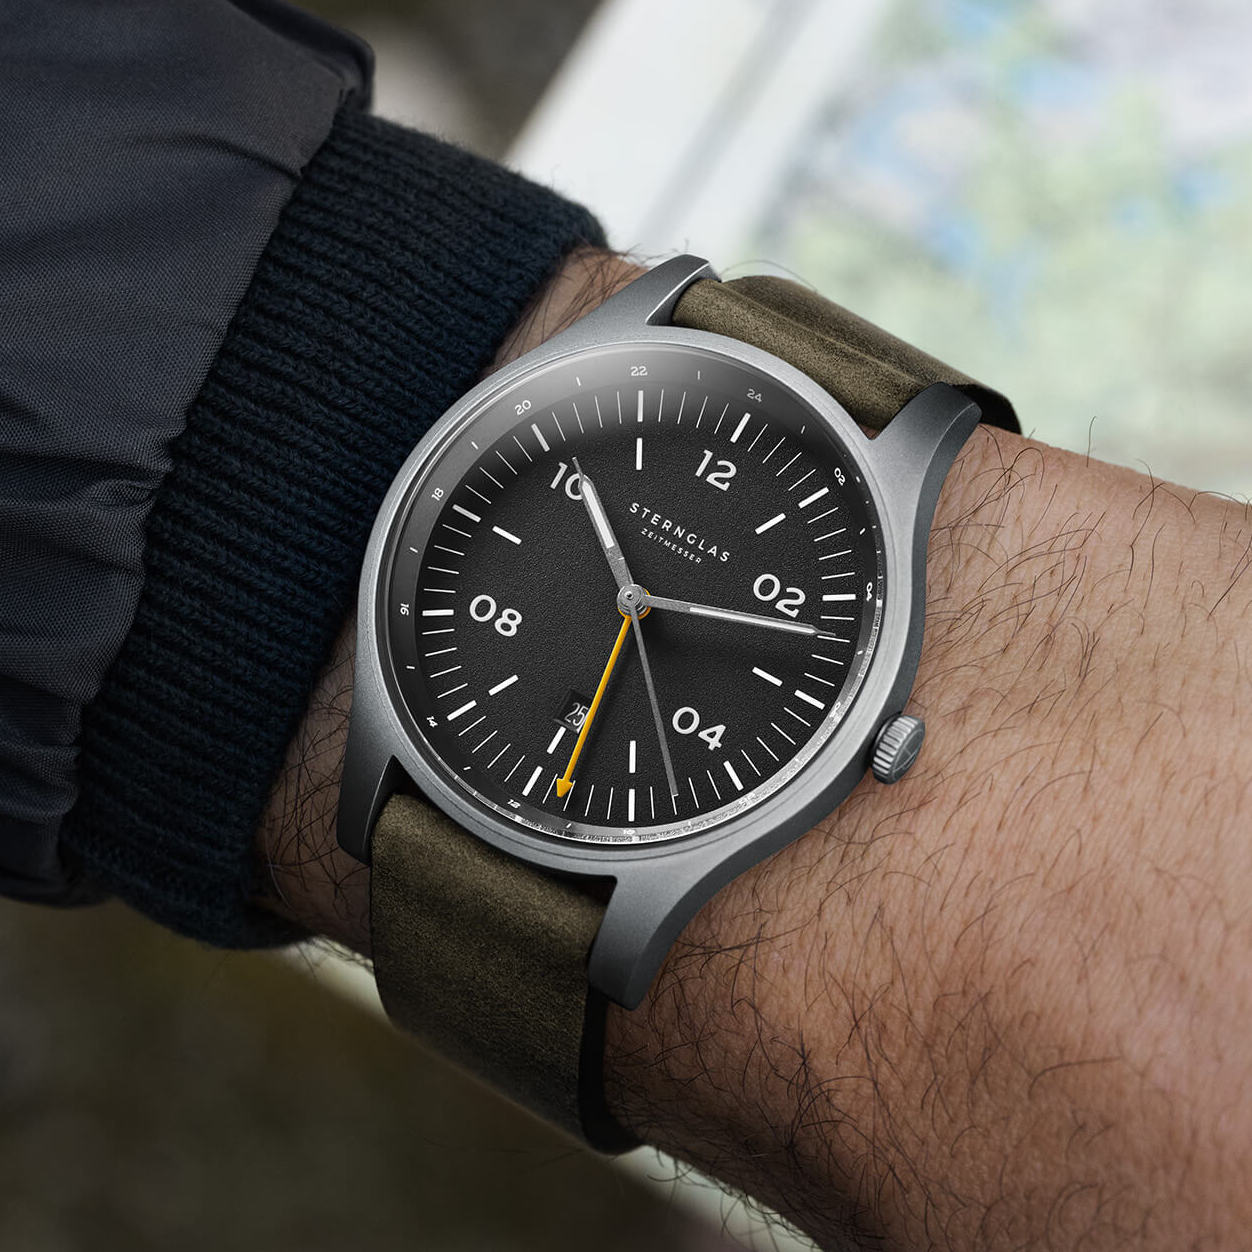 popup|Exciting dial details|Extra-large digits ensure optimal readability, while the textured surface and sloped rehaut provide striking details.